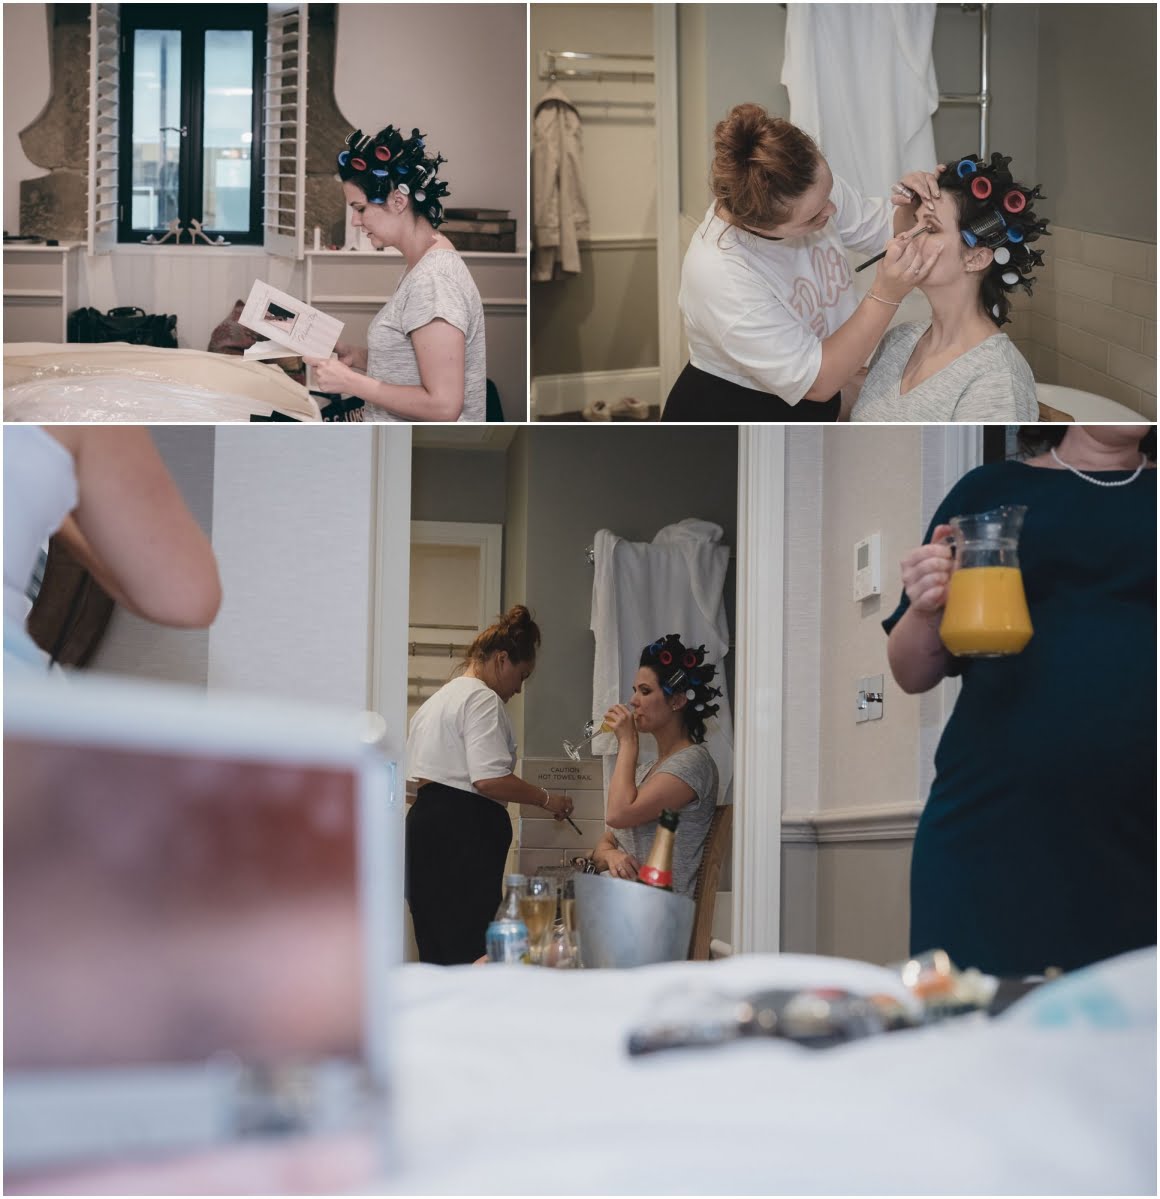 Bridal Preparations The King Street Townhouse Manchester , The King Street Townhouse wedding photos, The King Street Townhouse Wedding photographer